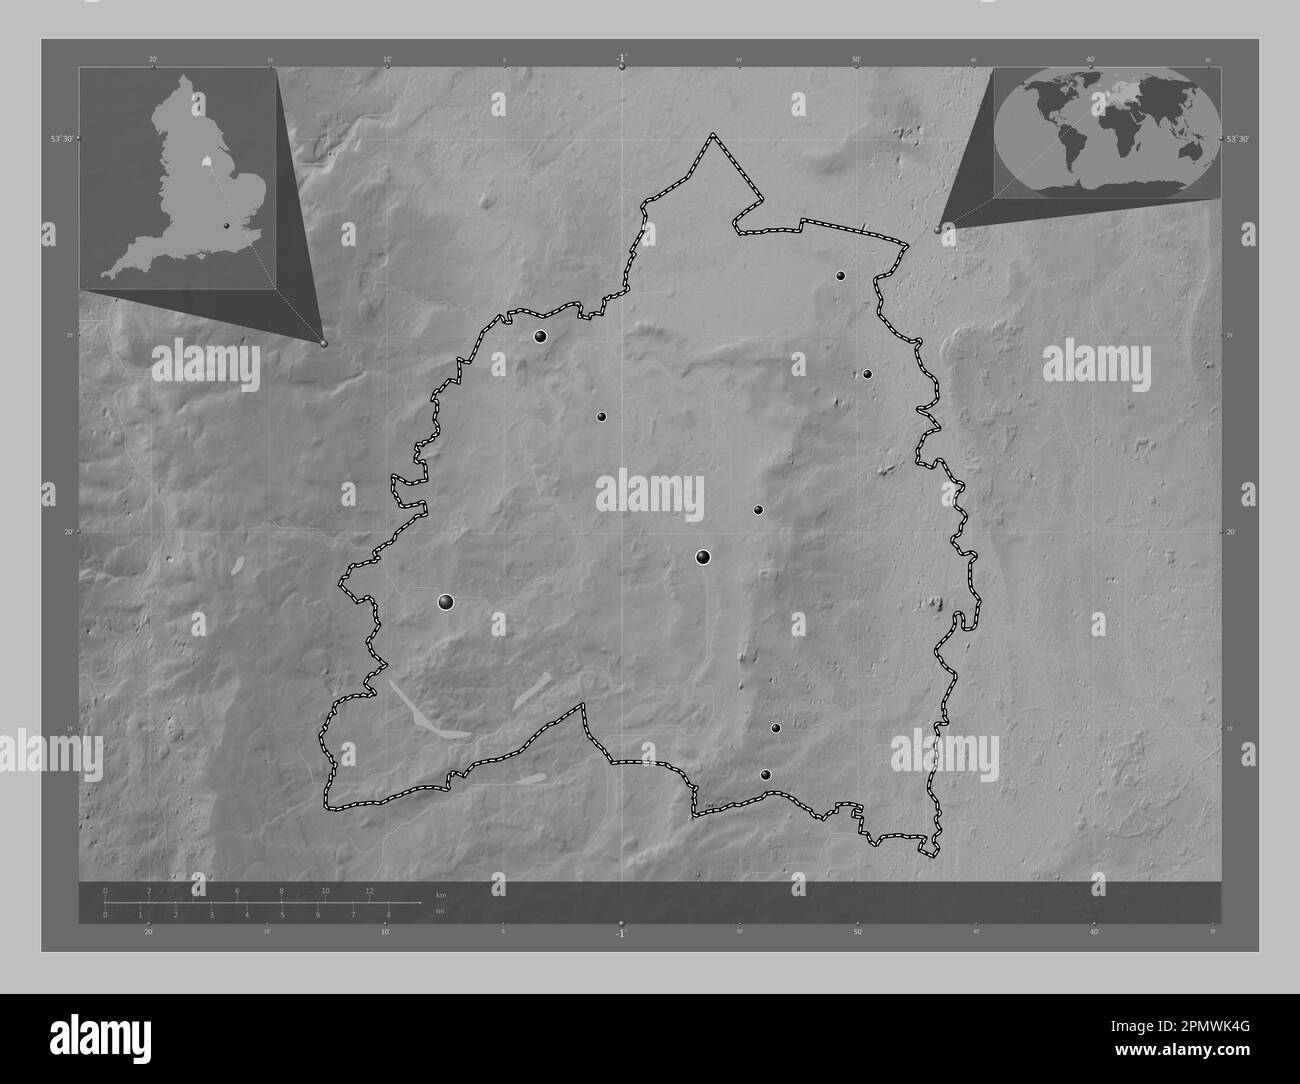 Bassetlaw, non metropolitan district of England - Great Britain. Grayscale elevation map with lakes and rivers. Locations of major cities of the regio Stock Photo